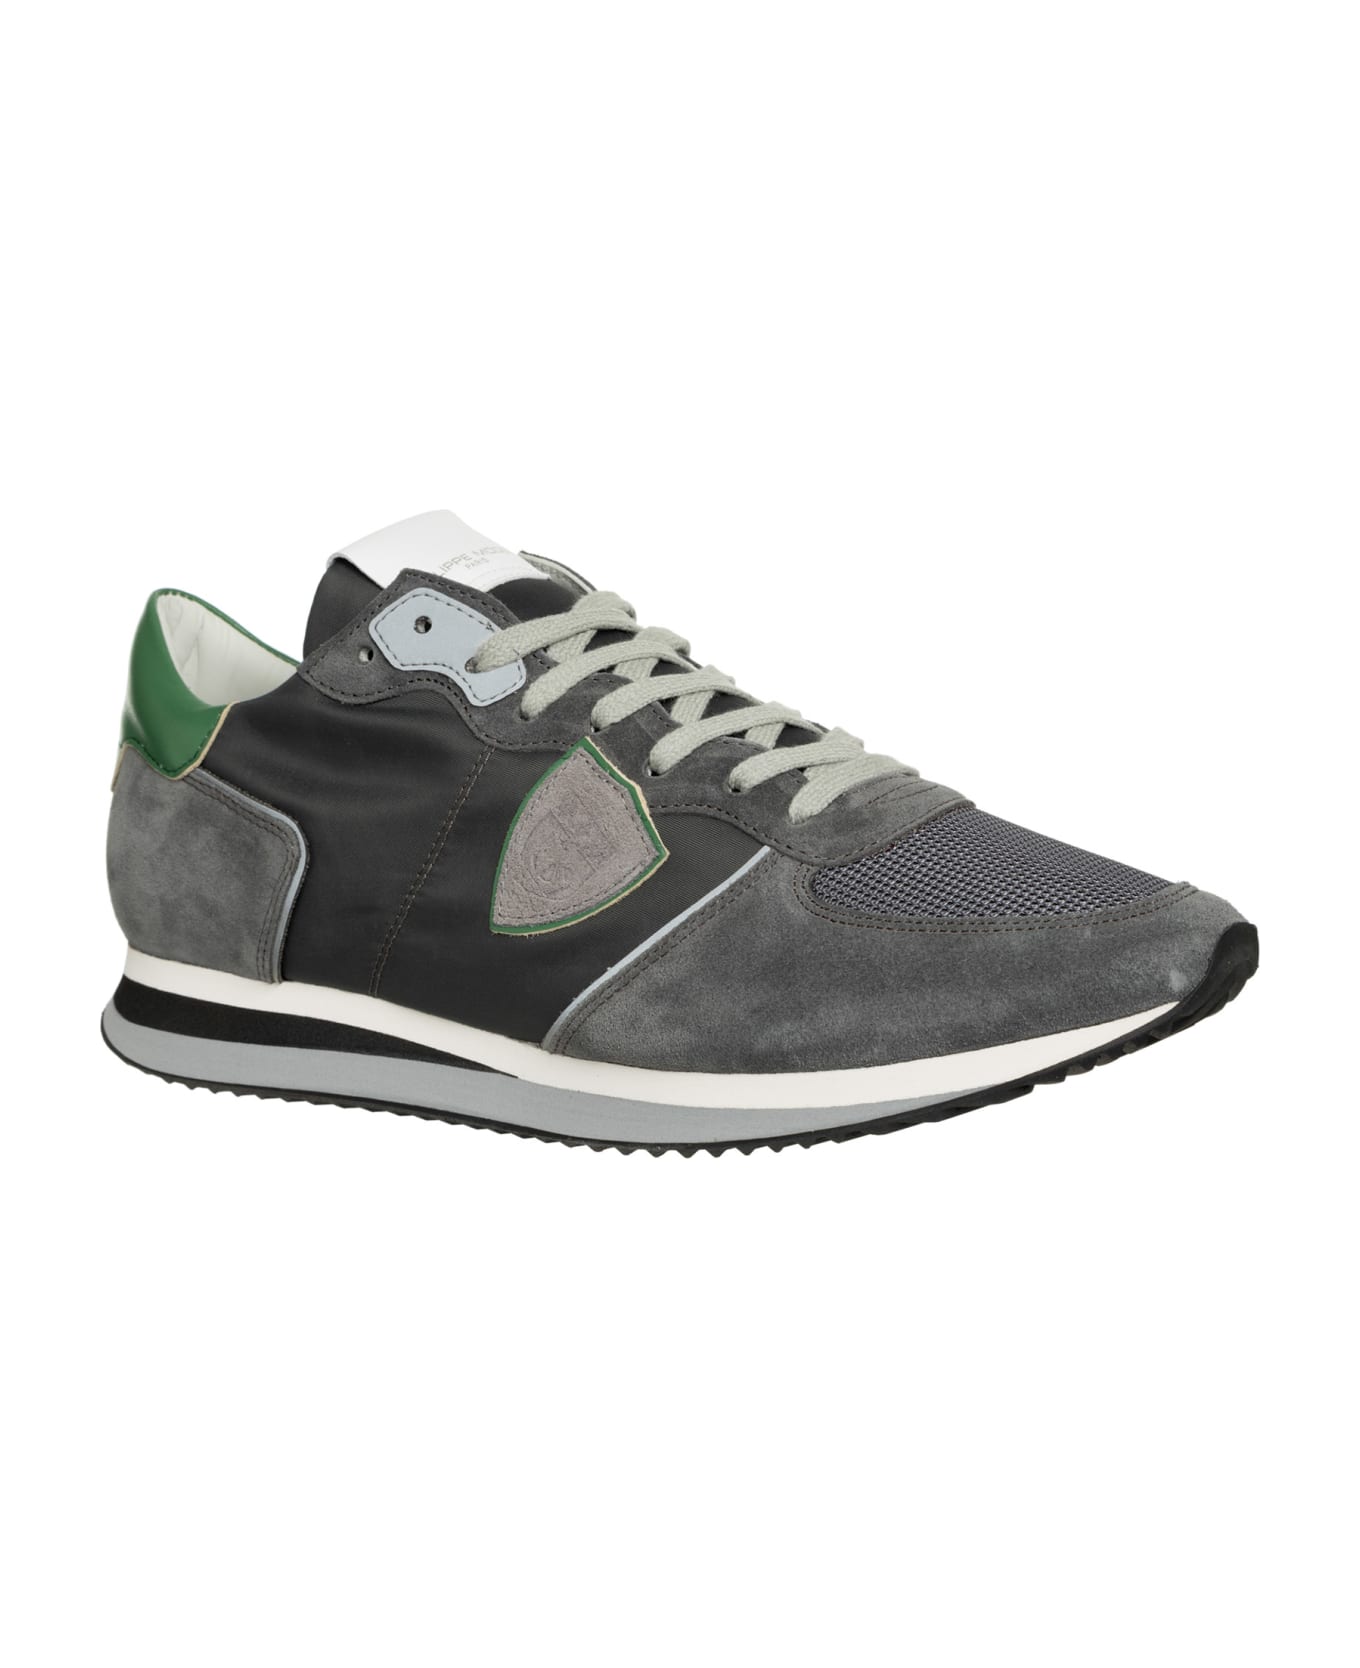 Philippe Model Trpx Leather Sneakers